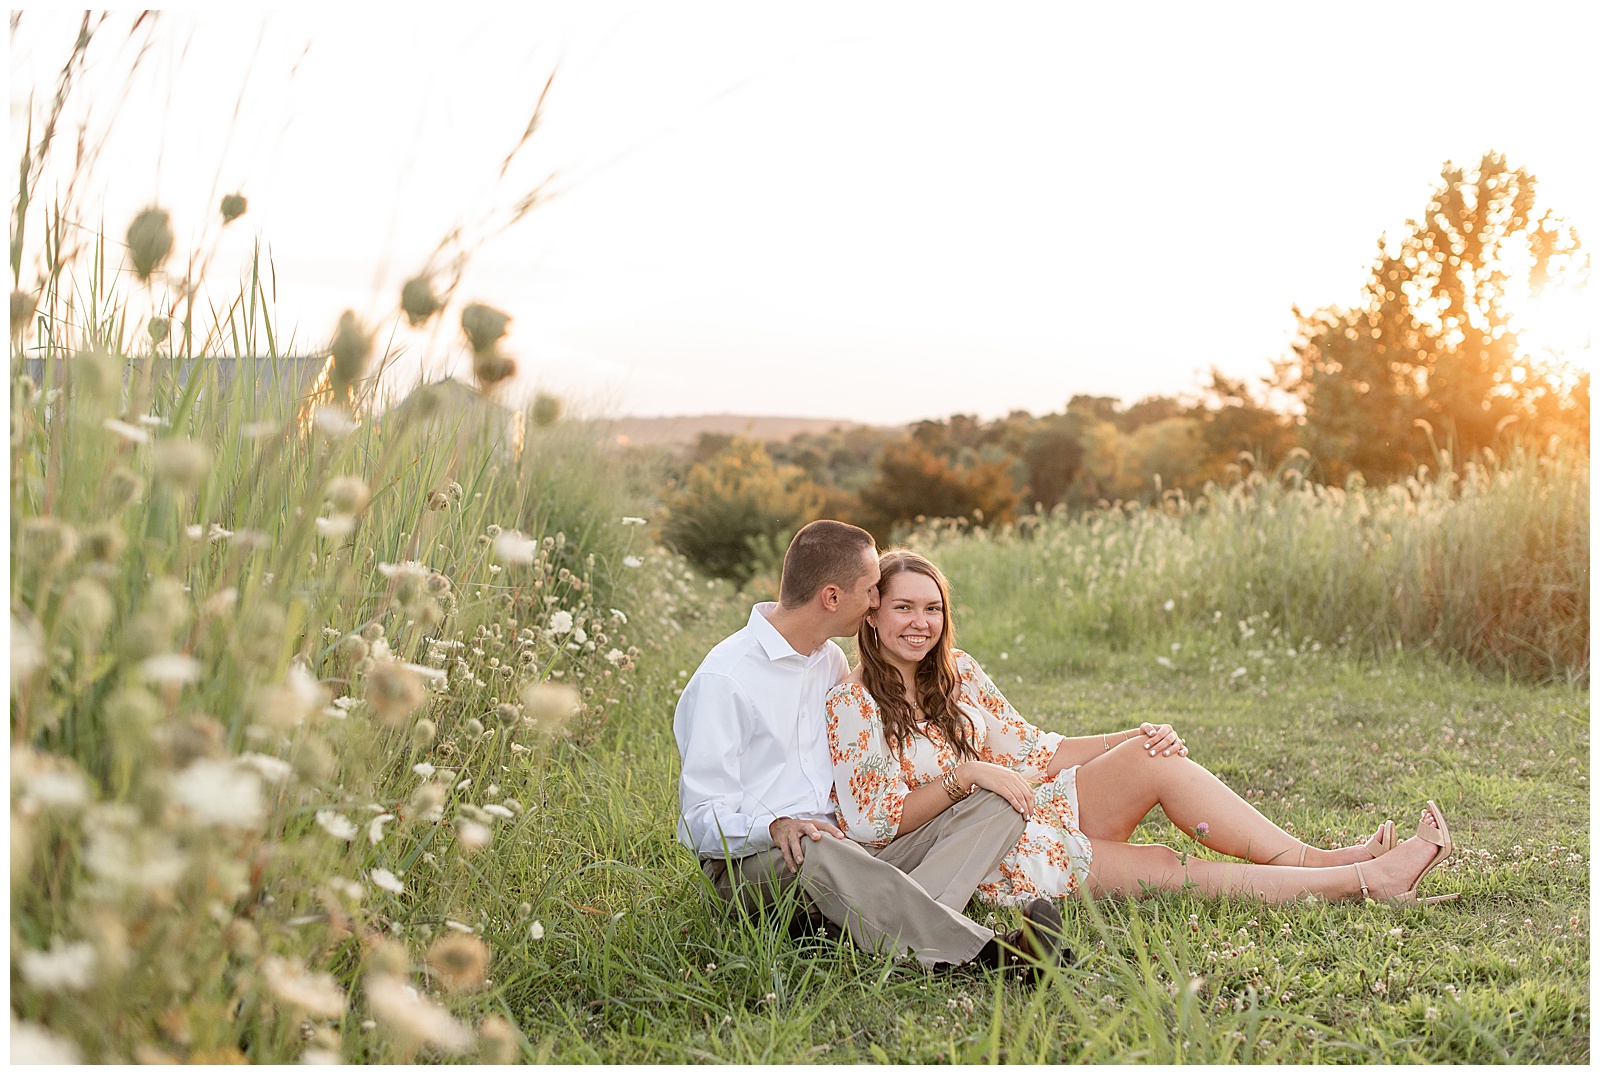 engaged couple sitting in the grass by field of wildflowers at sunset at overlook park in lancaster county